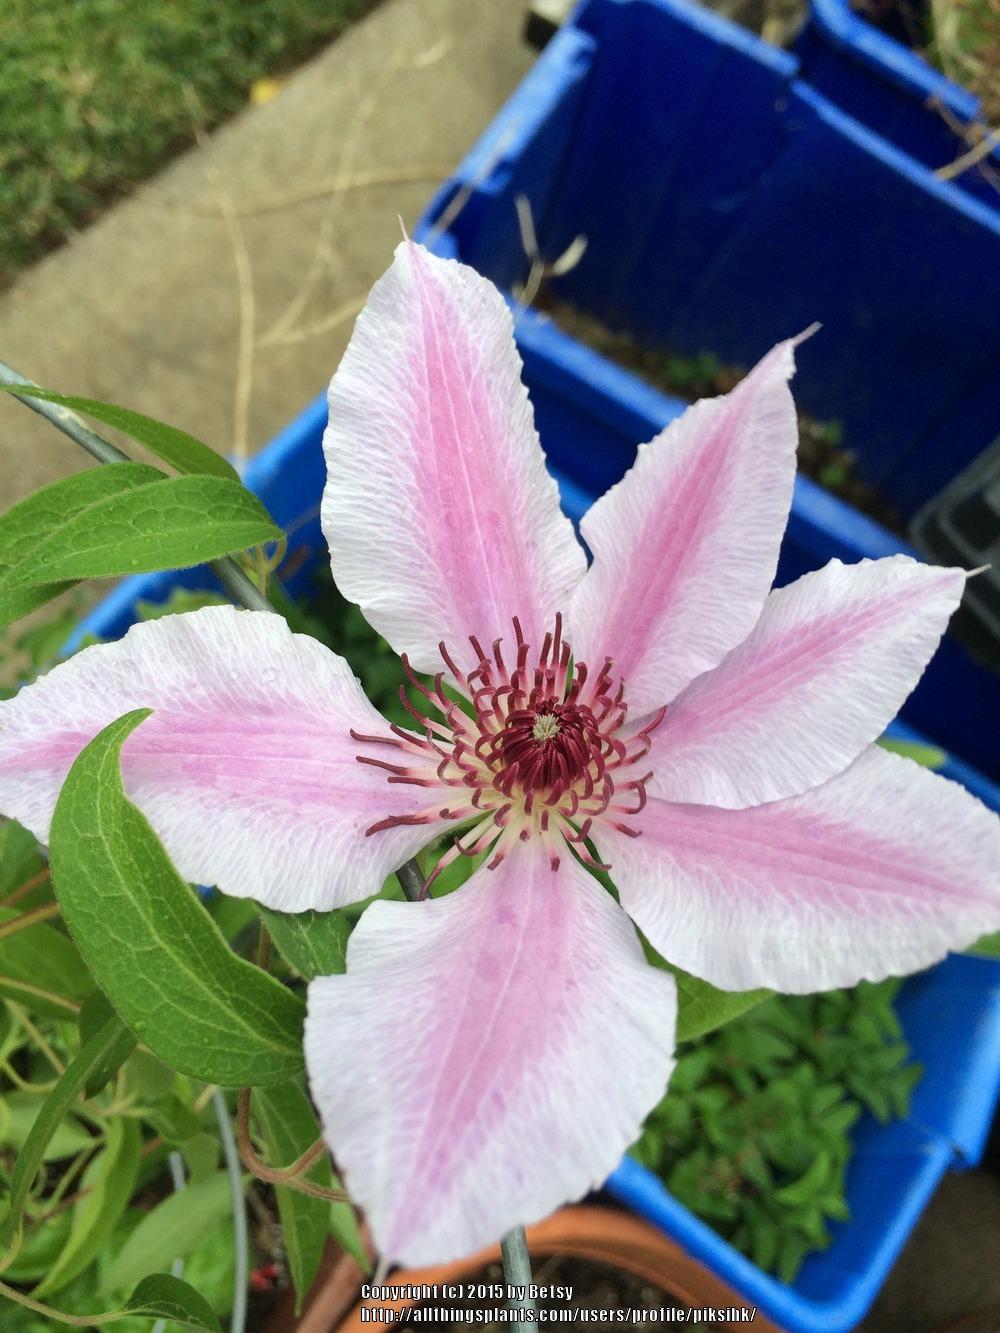 Photo of Clematis uploaded by piksihk